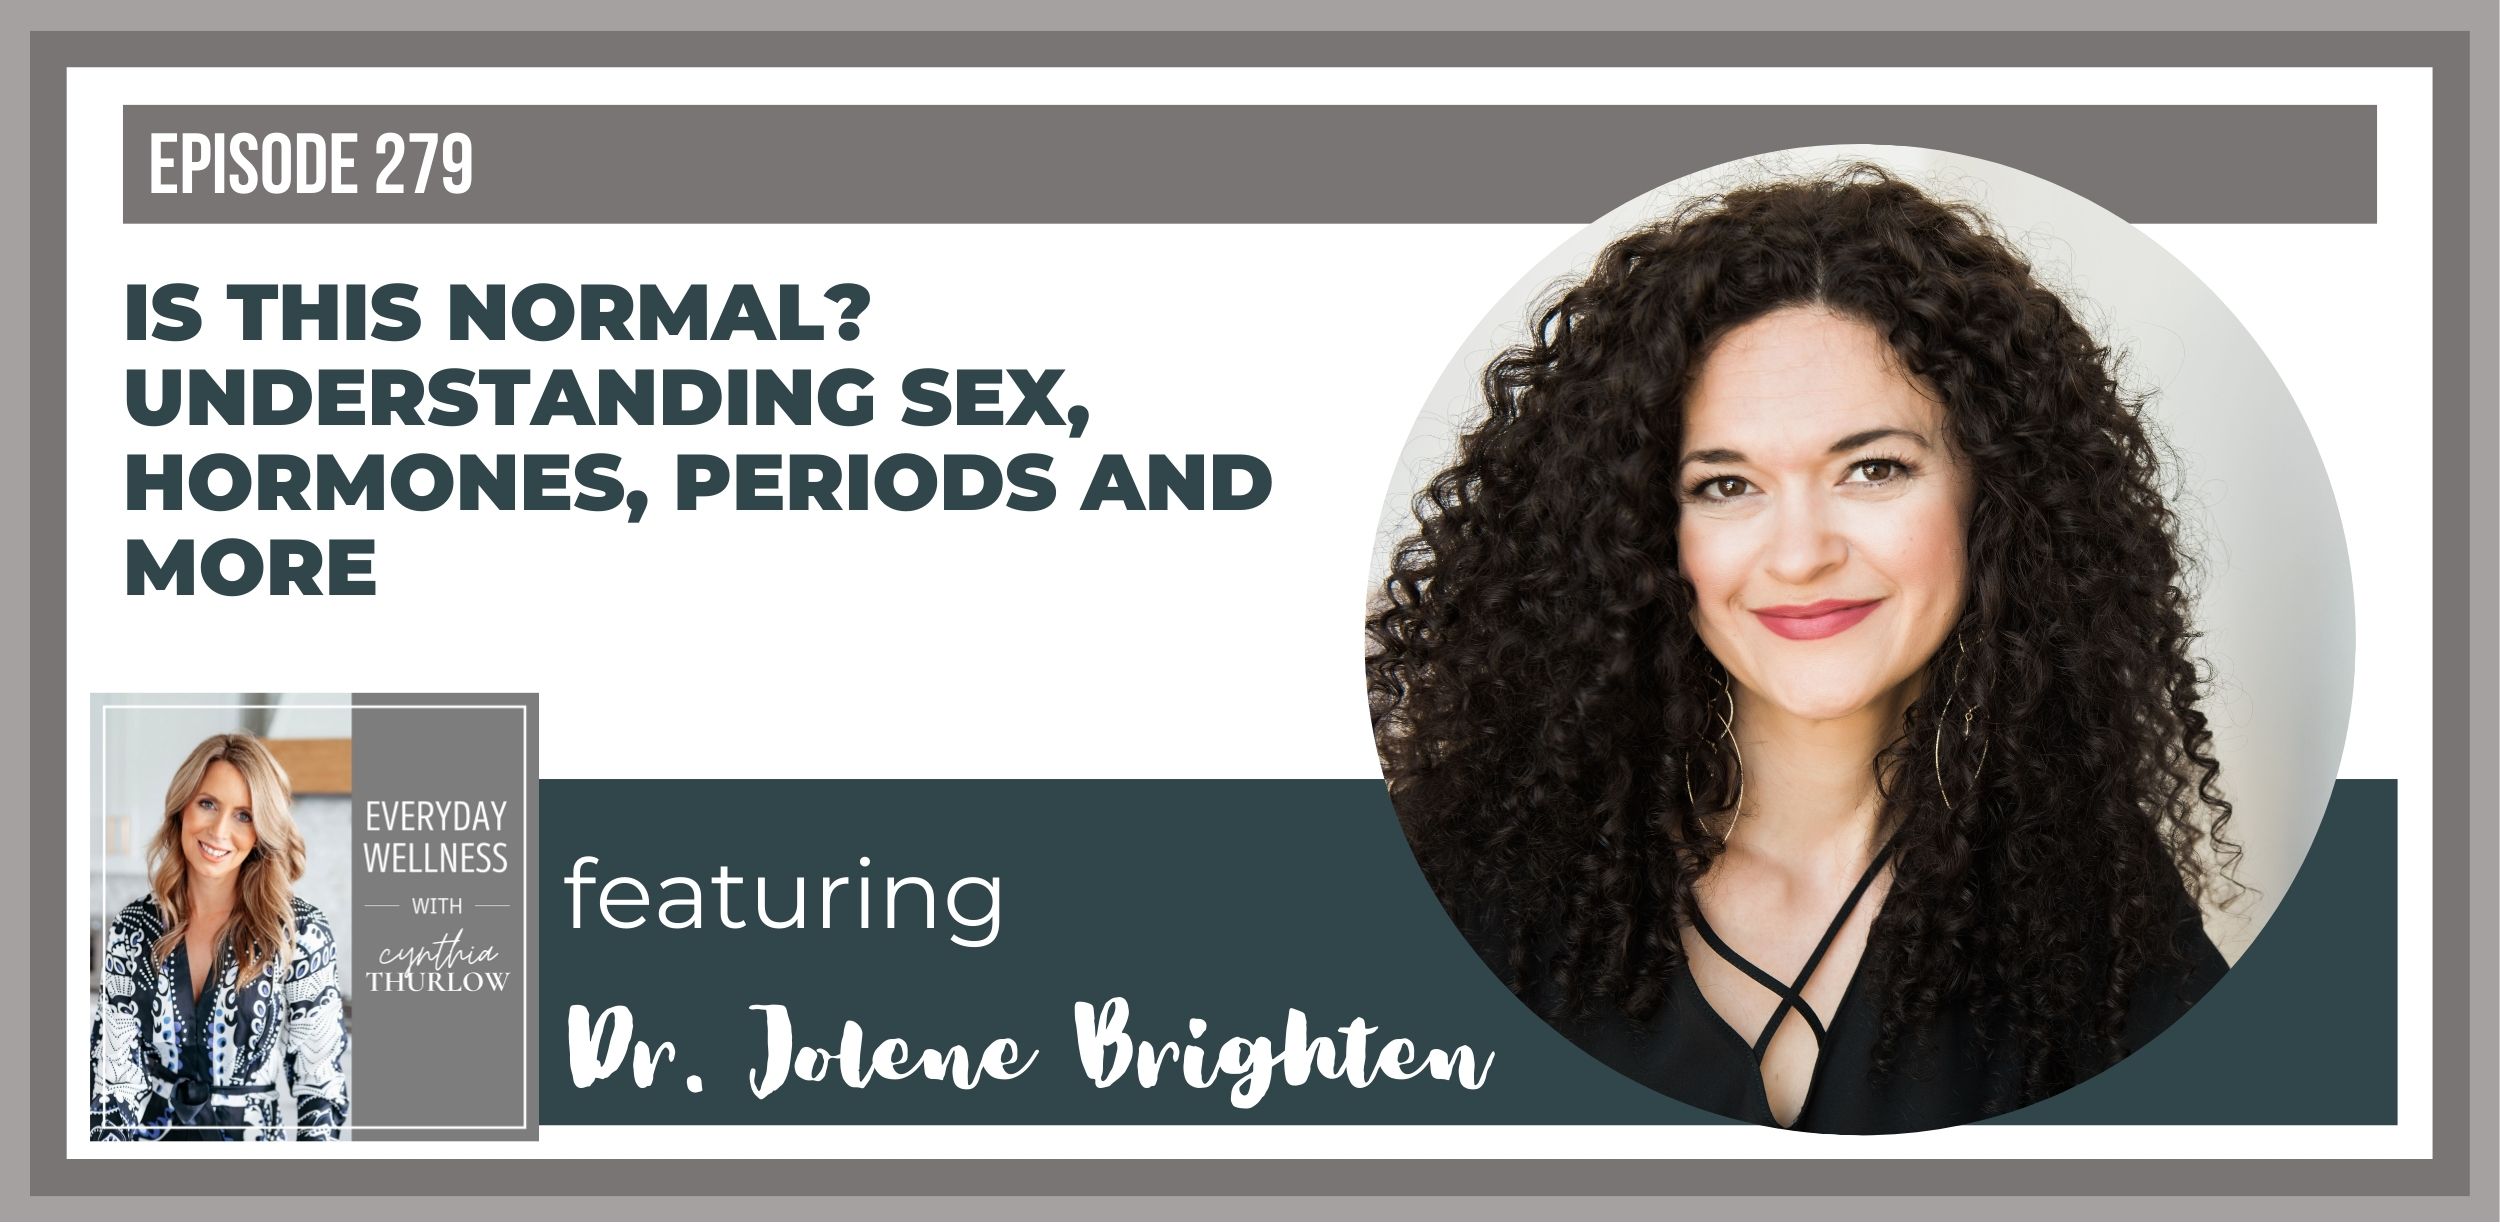 Sleep Problems Before and During Your Period - Dr. Jolene Brighten